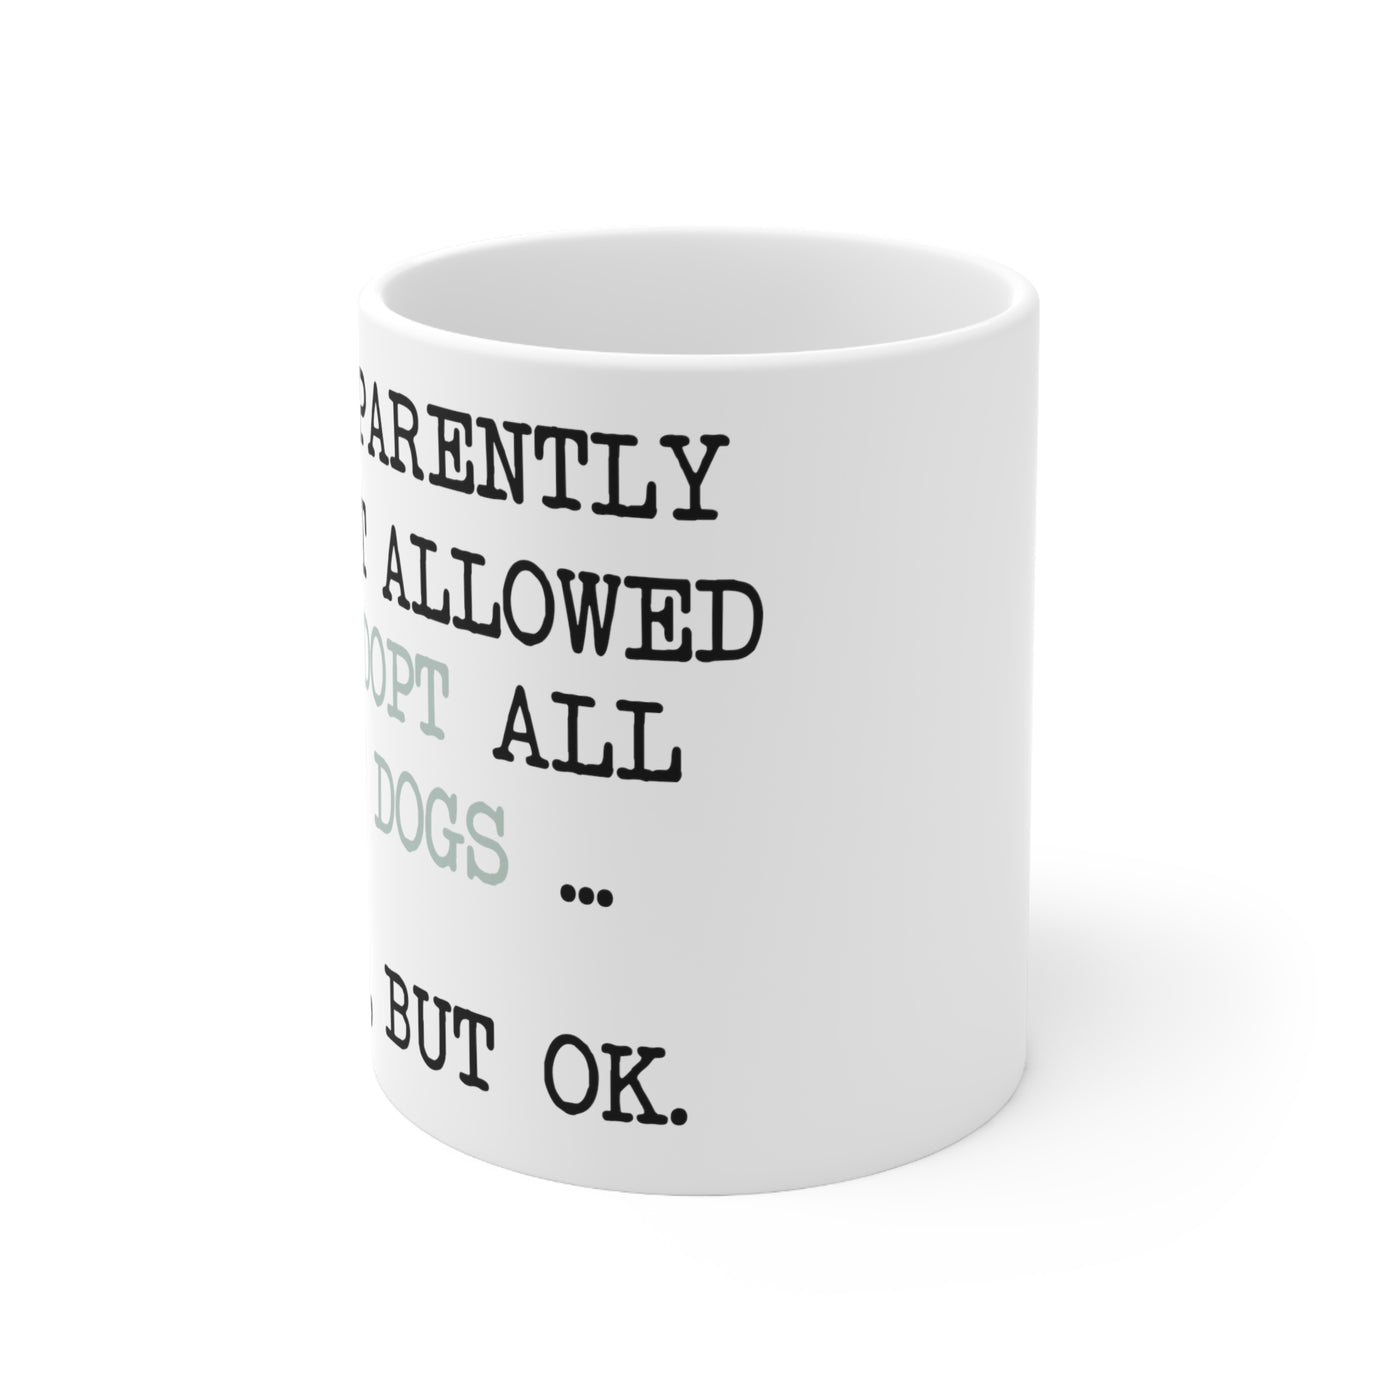 So Apparently I'm Not Allowed To Adopt All The Dogs ... Rude, But OK. Colored Print Ceramic Mug 11oz